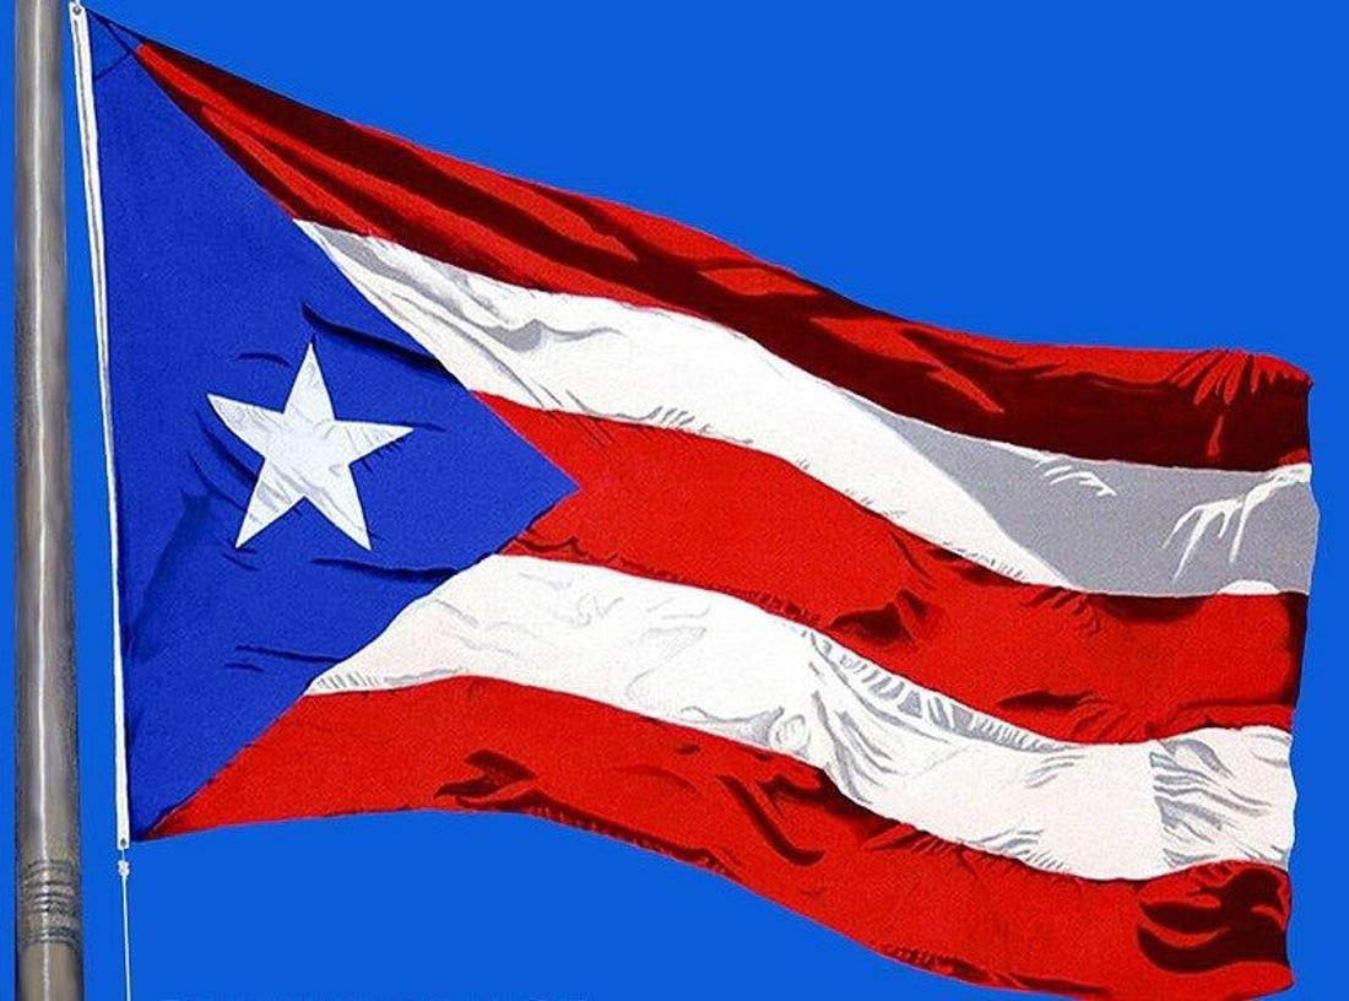 New Huge 4X6 Ft Puerto Rico State Of By Flag,USA - Walmart.com